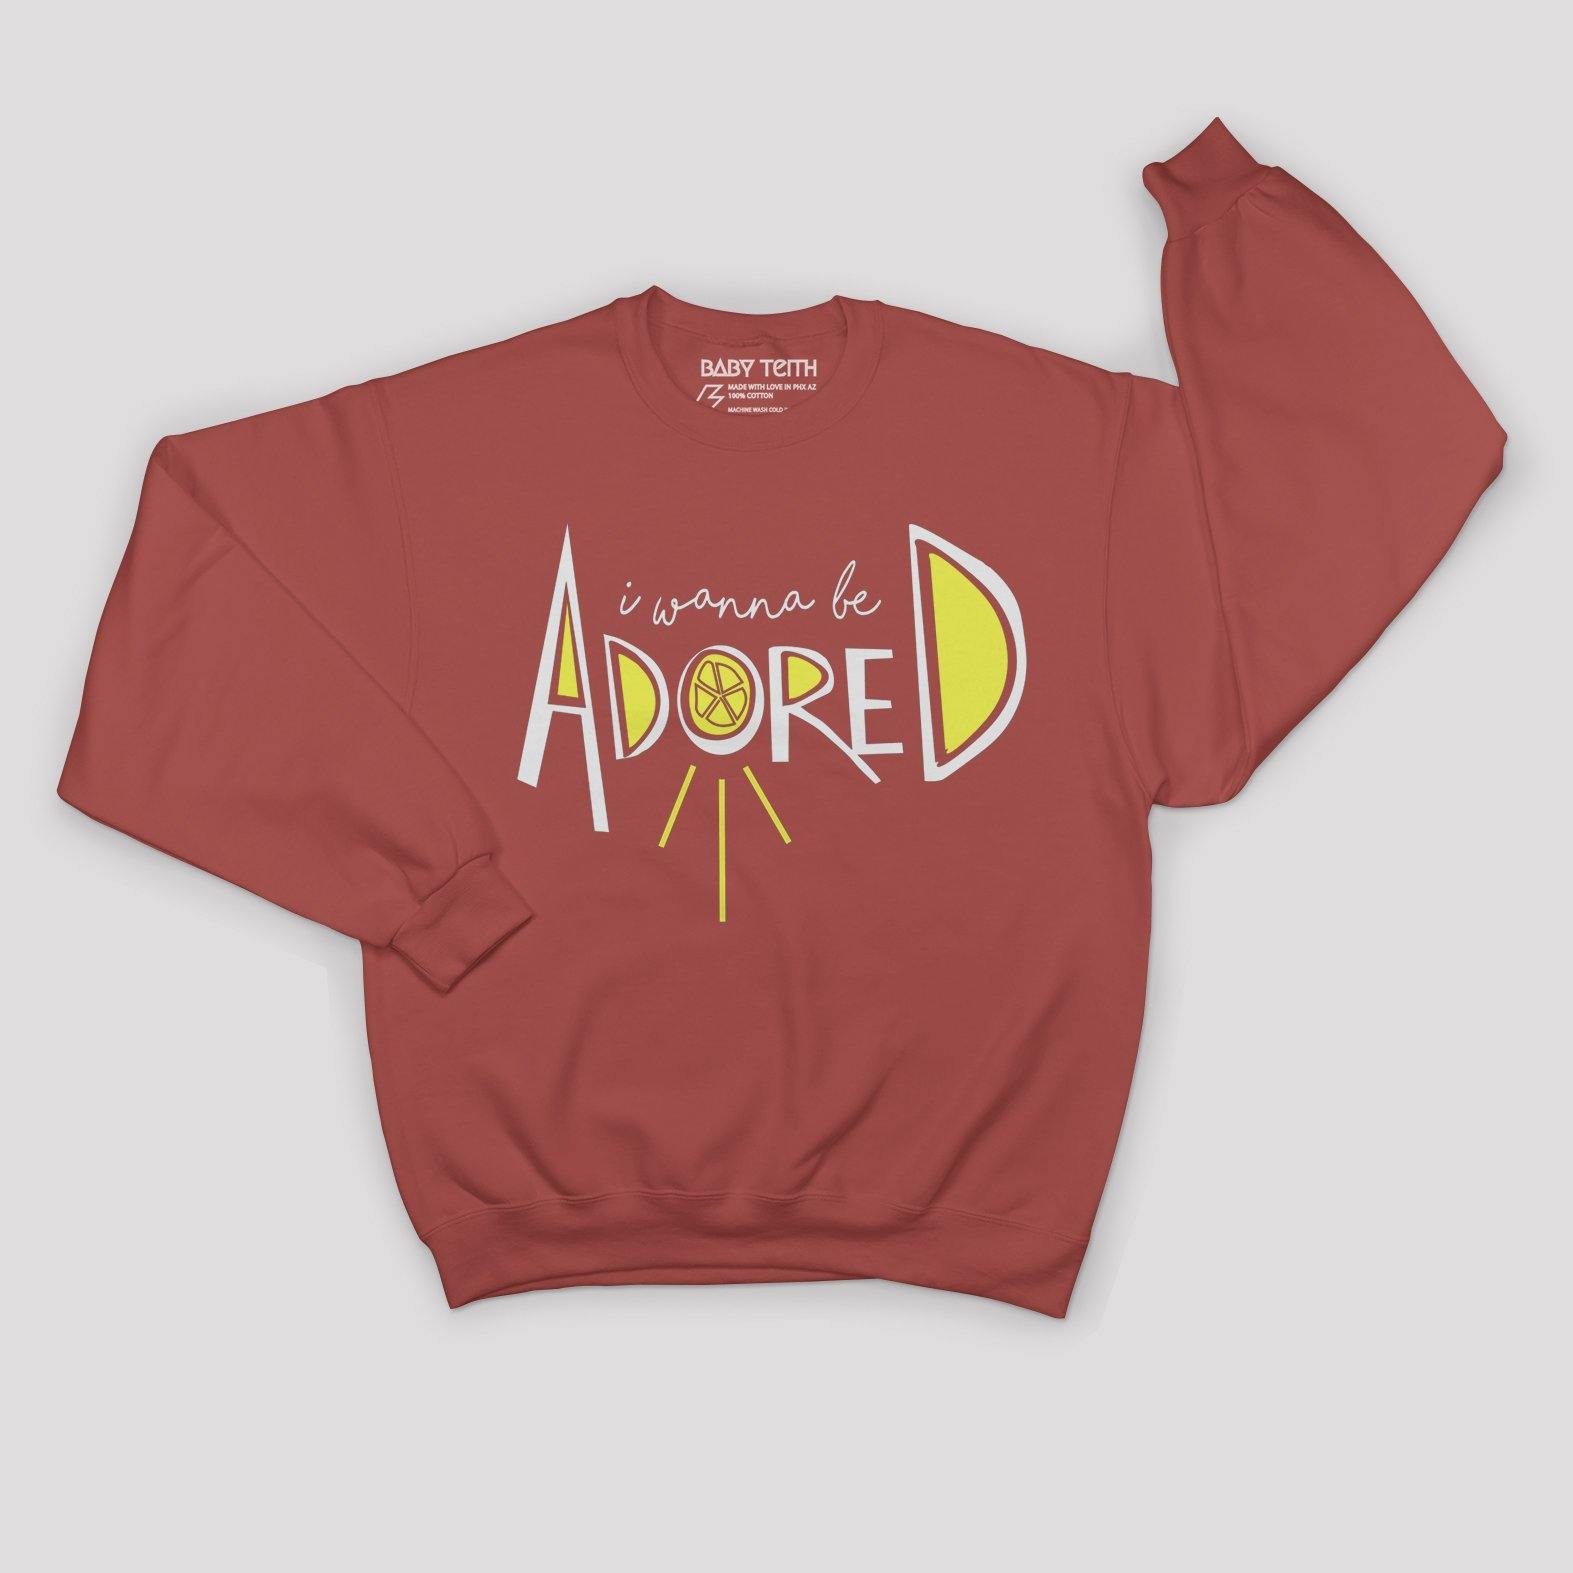 "I Wanna Be Adored" The Stone Roses Inspired Sweatshirt for Kids - Baby Teith